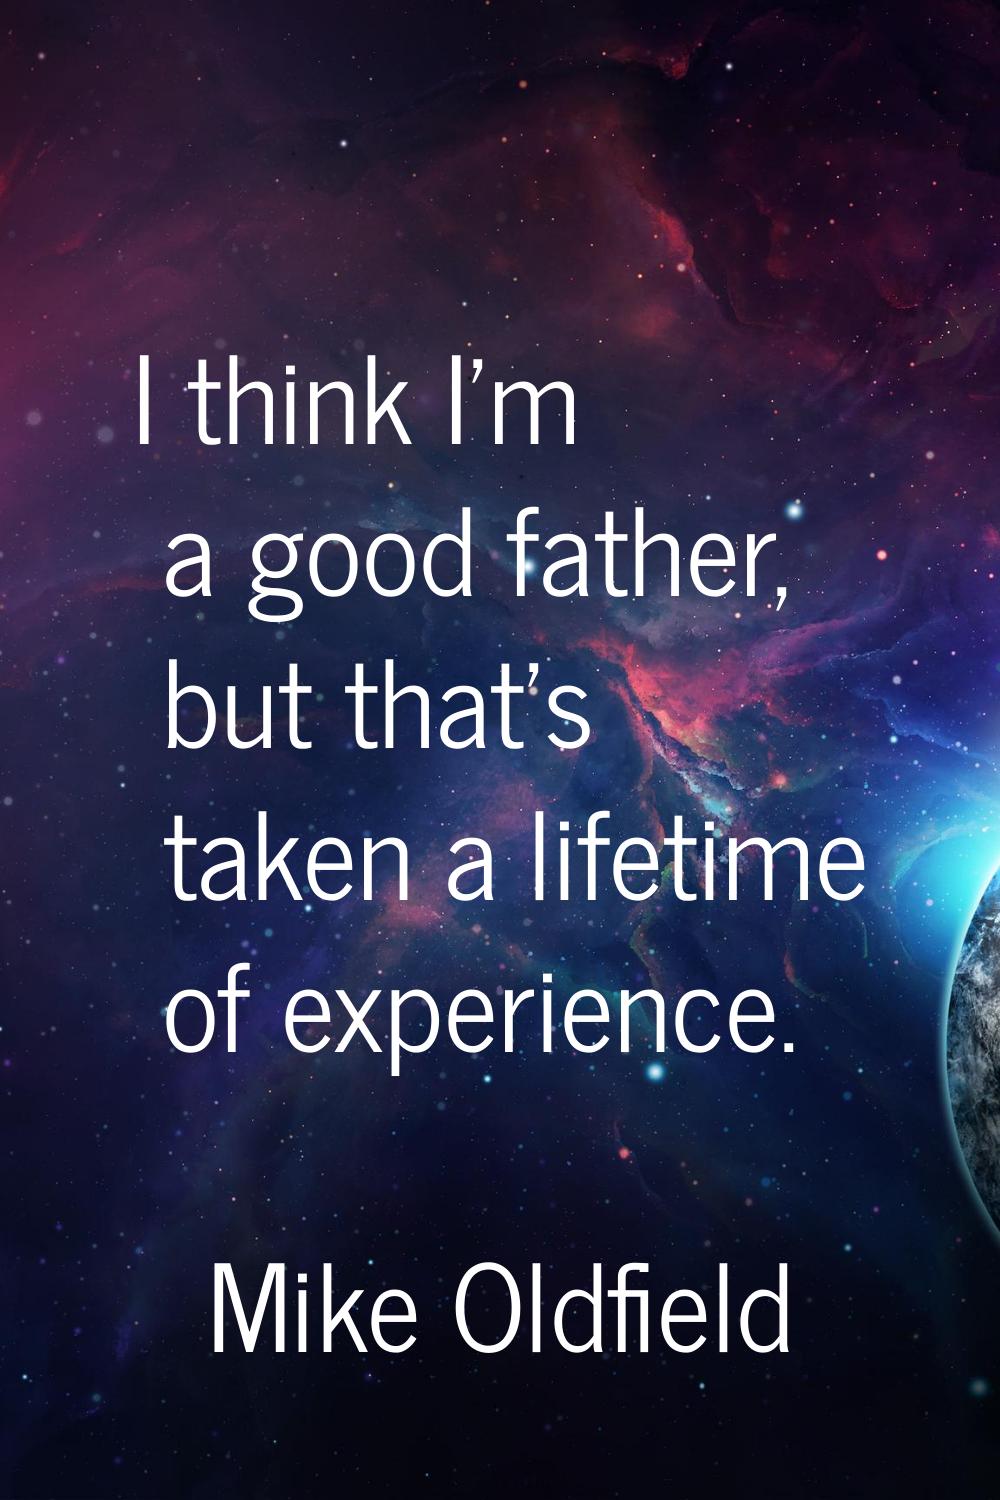 I think I'm a good father, but that's taken a lifetime of experience.